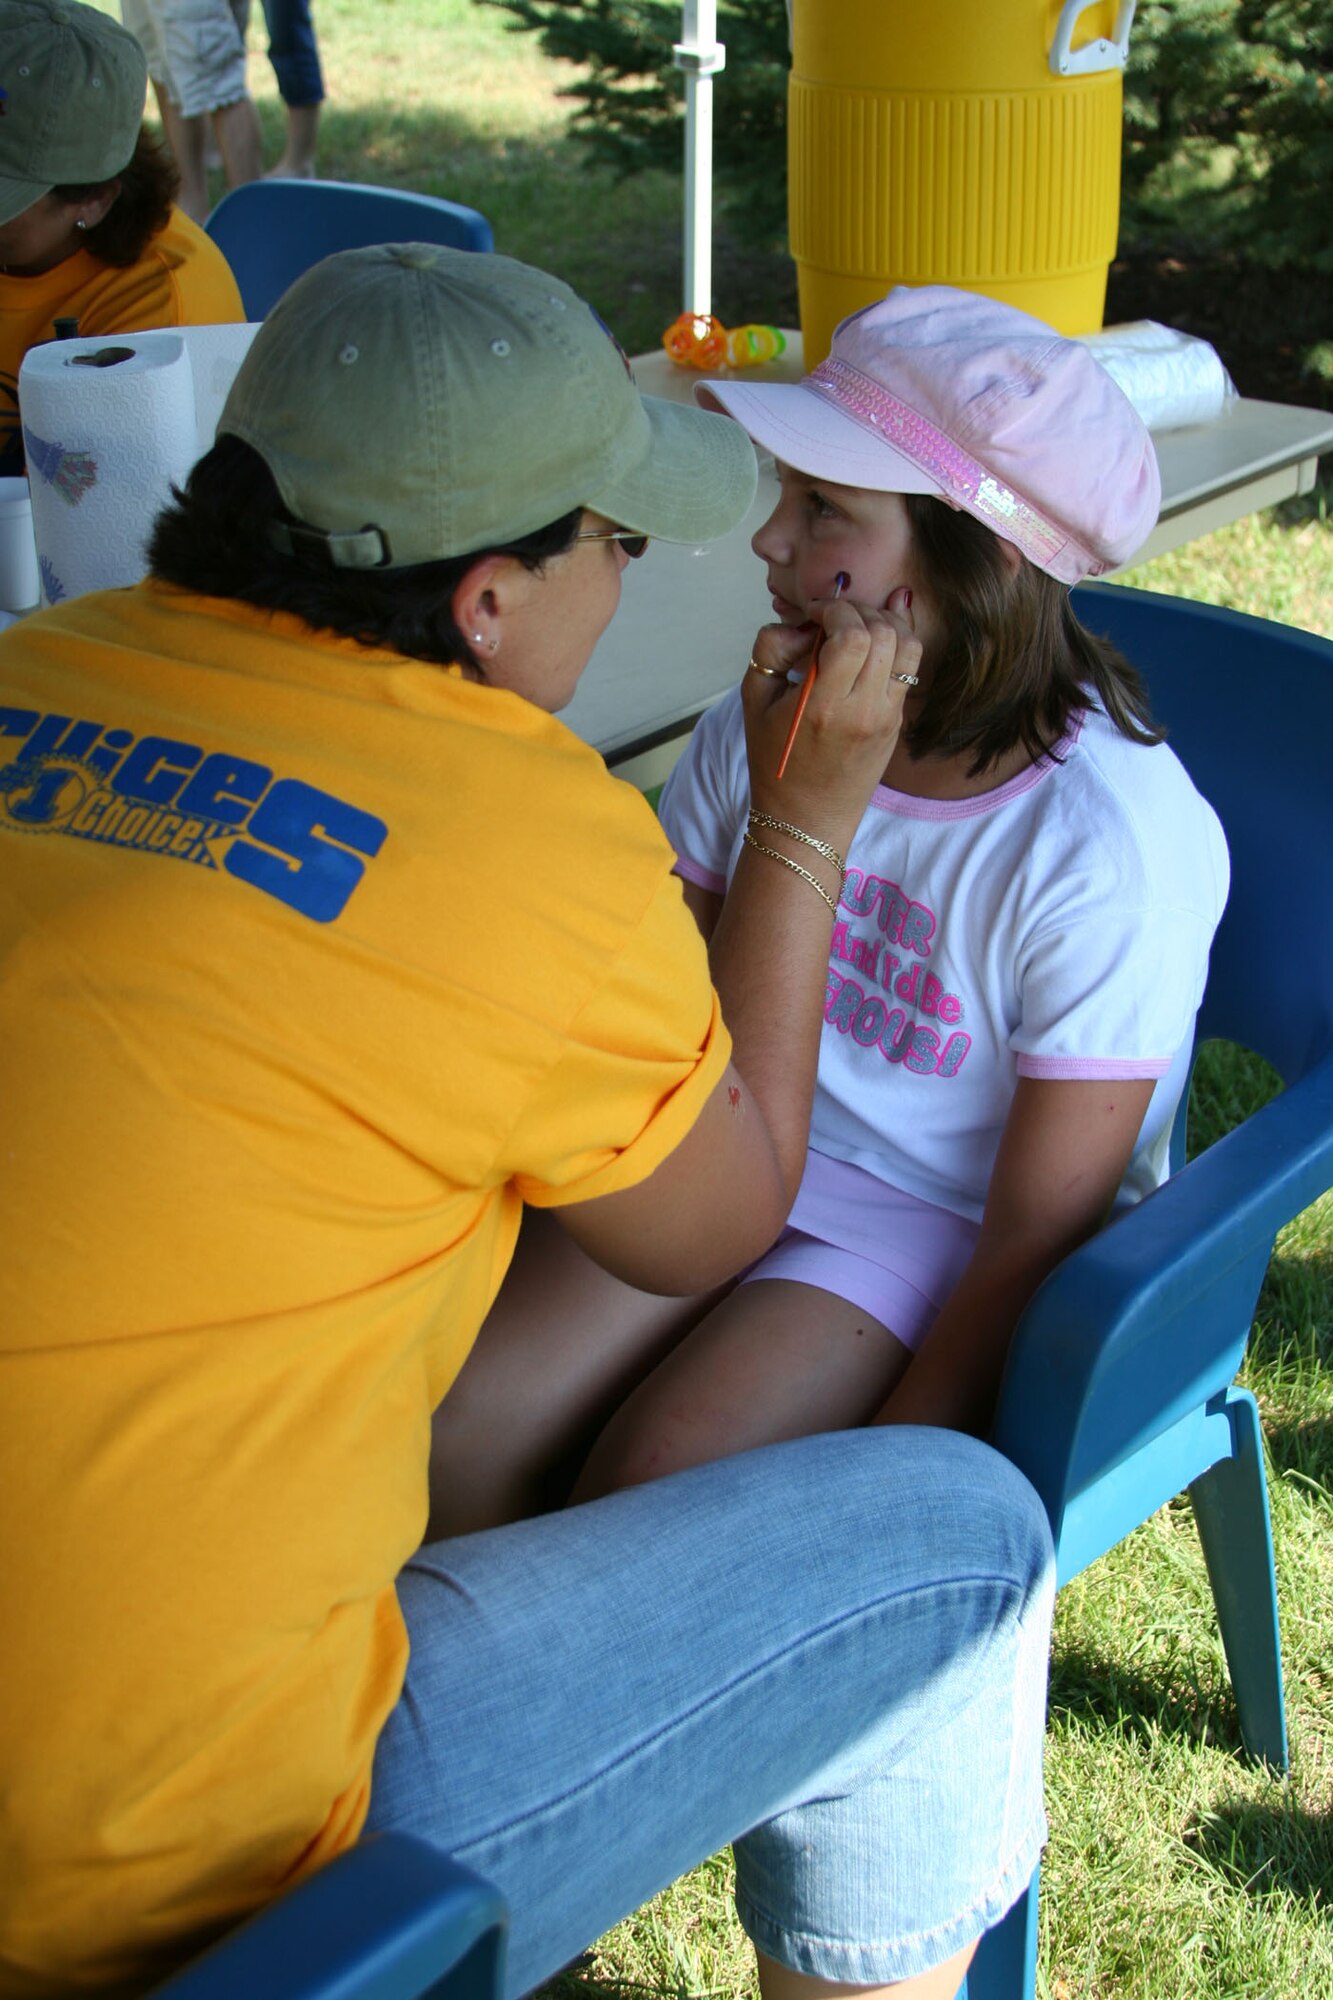 Little Warrior Caitlin, 8, gets her face painted by Lyndsee Frost, 341st Services Squadron, at the "Cruisin' the Summer" base picnic July 27. Face painting was just one of many children's events offered at the picnic. More than 2,500 people attended the free, annual barbeque at Malmstrom Air Force Base, Mont. , sponsored by the 341st Services Squadron and local businesses.(U.S. Air Force photo/Senior Airman Eydie Sakura).